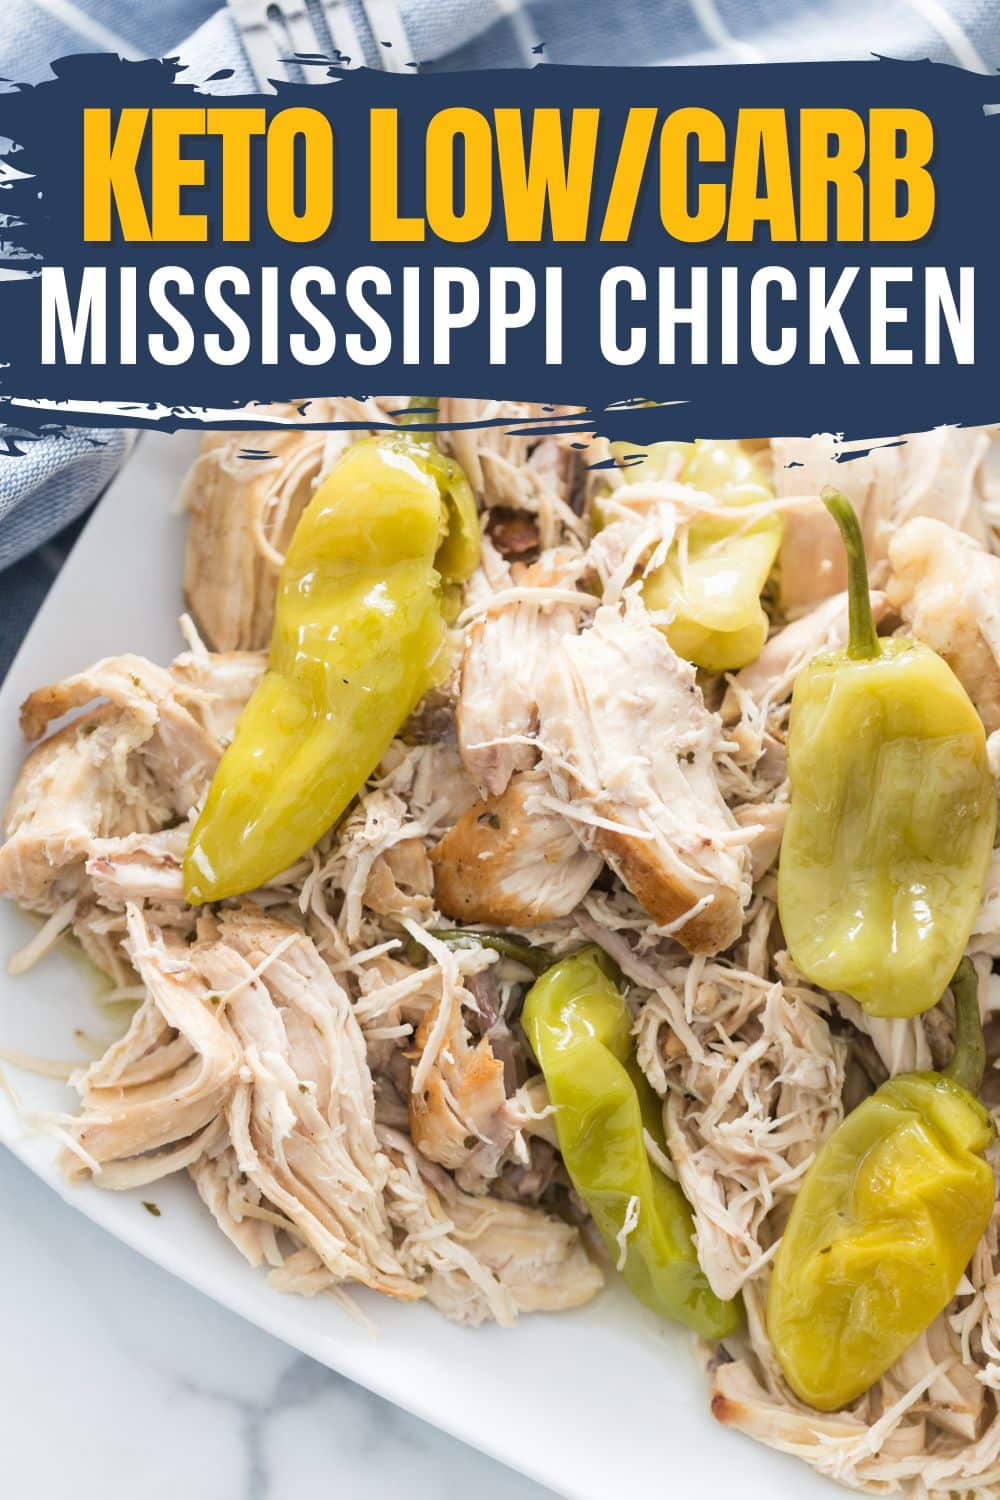 Image of finished mississippi chicken crock pot recipe with blue banner and yellow and white lettering